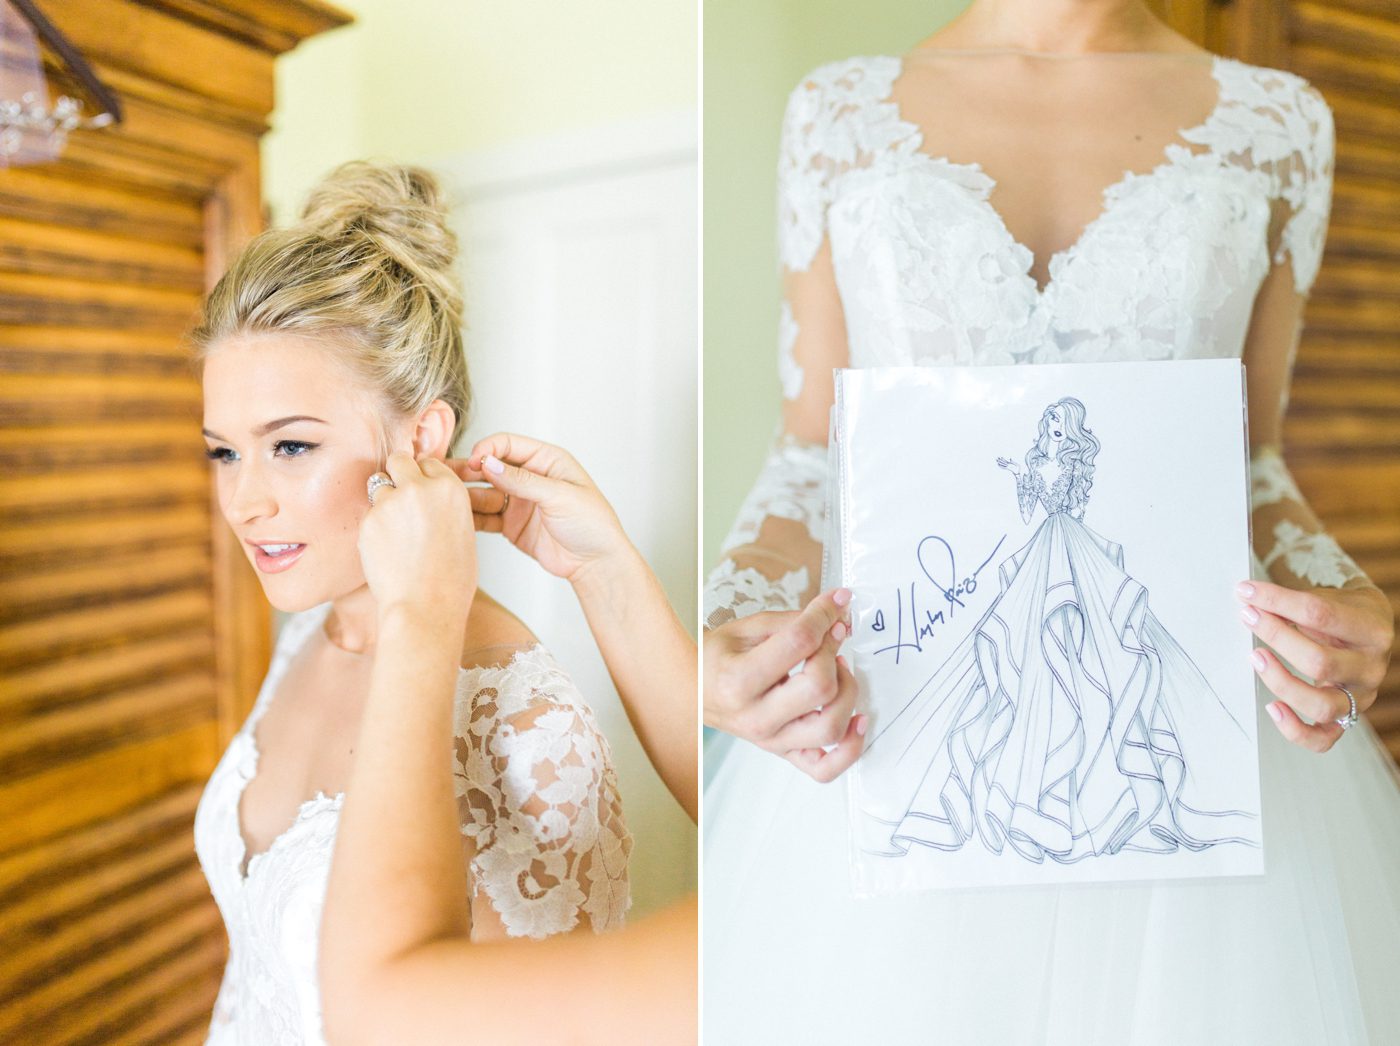 Hayley Paige wedding gown with lace sleeves and custom drawing of the dress. Photo by Catherine Ann Photography